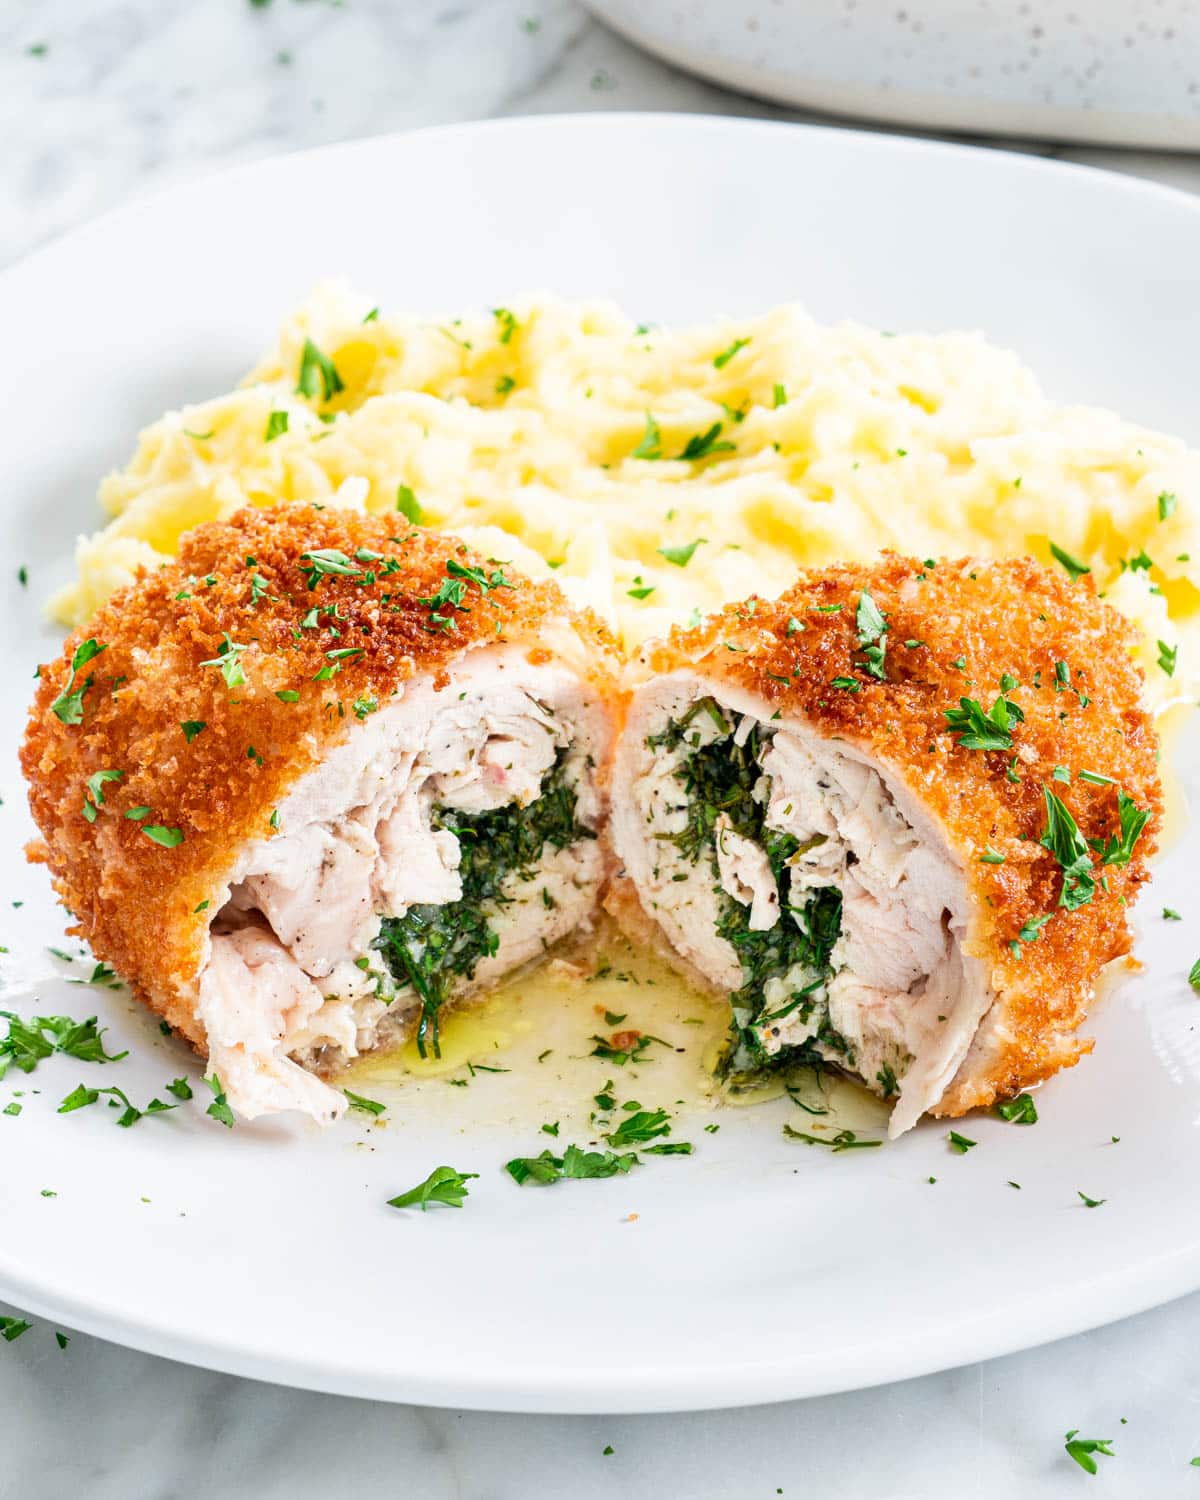 chicken kiev cut in half on a plate with mashed potatoes